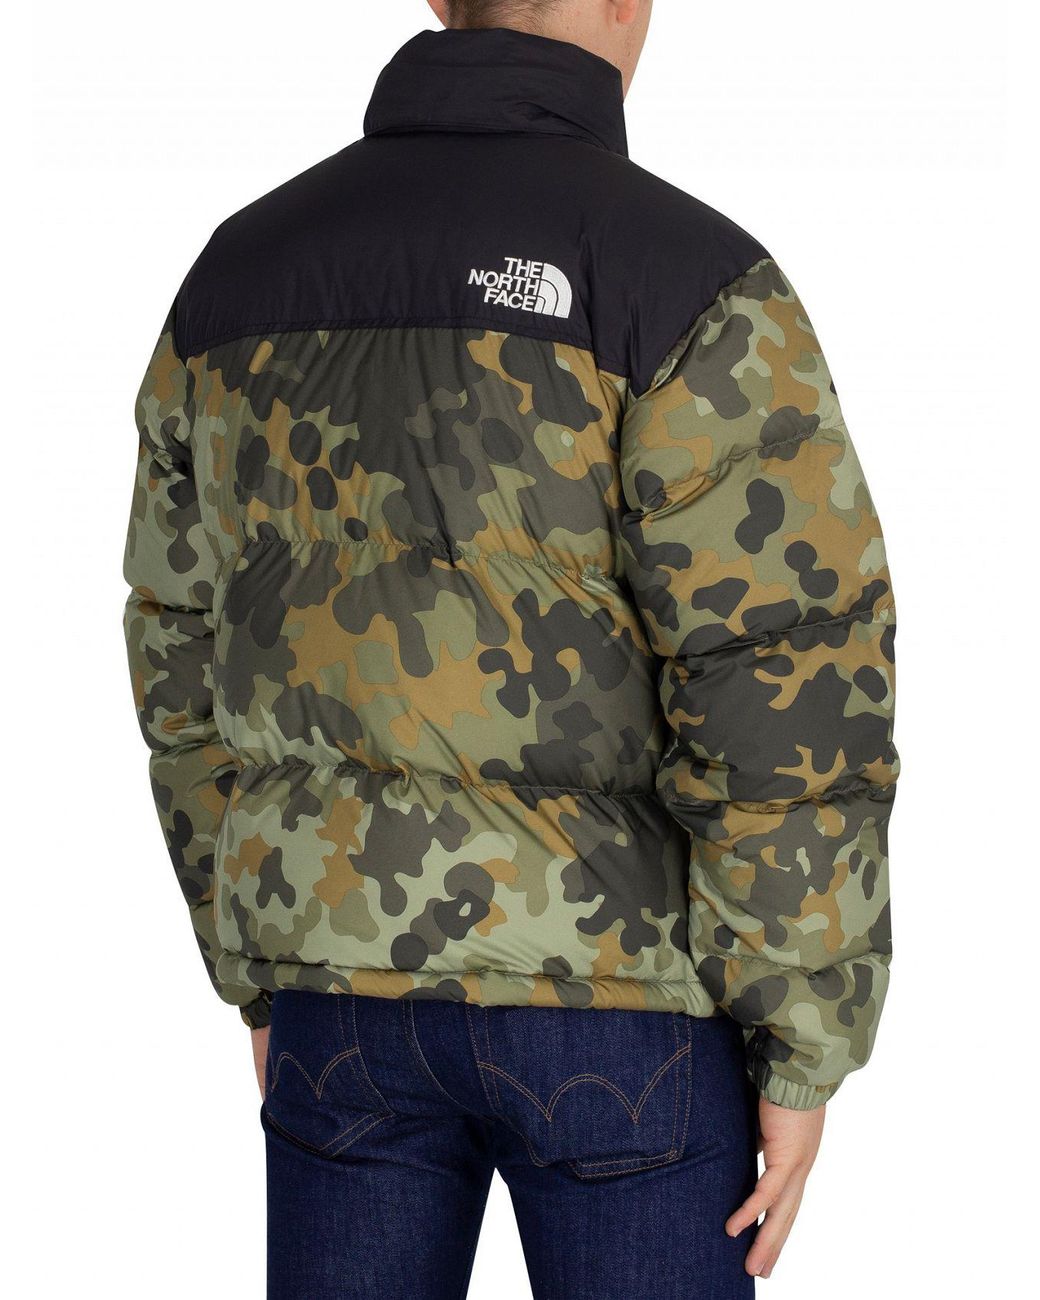 Camo North Face Puffer | vlr.eng.br